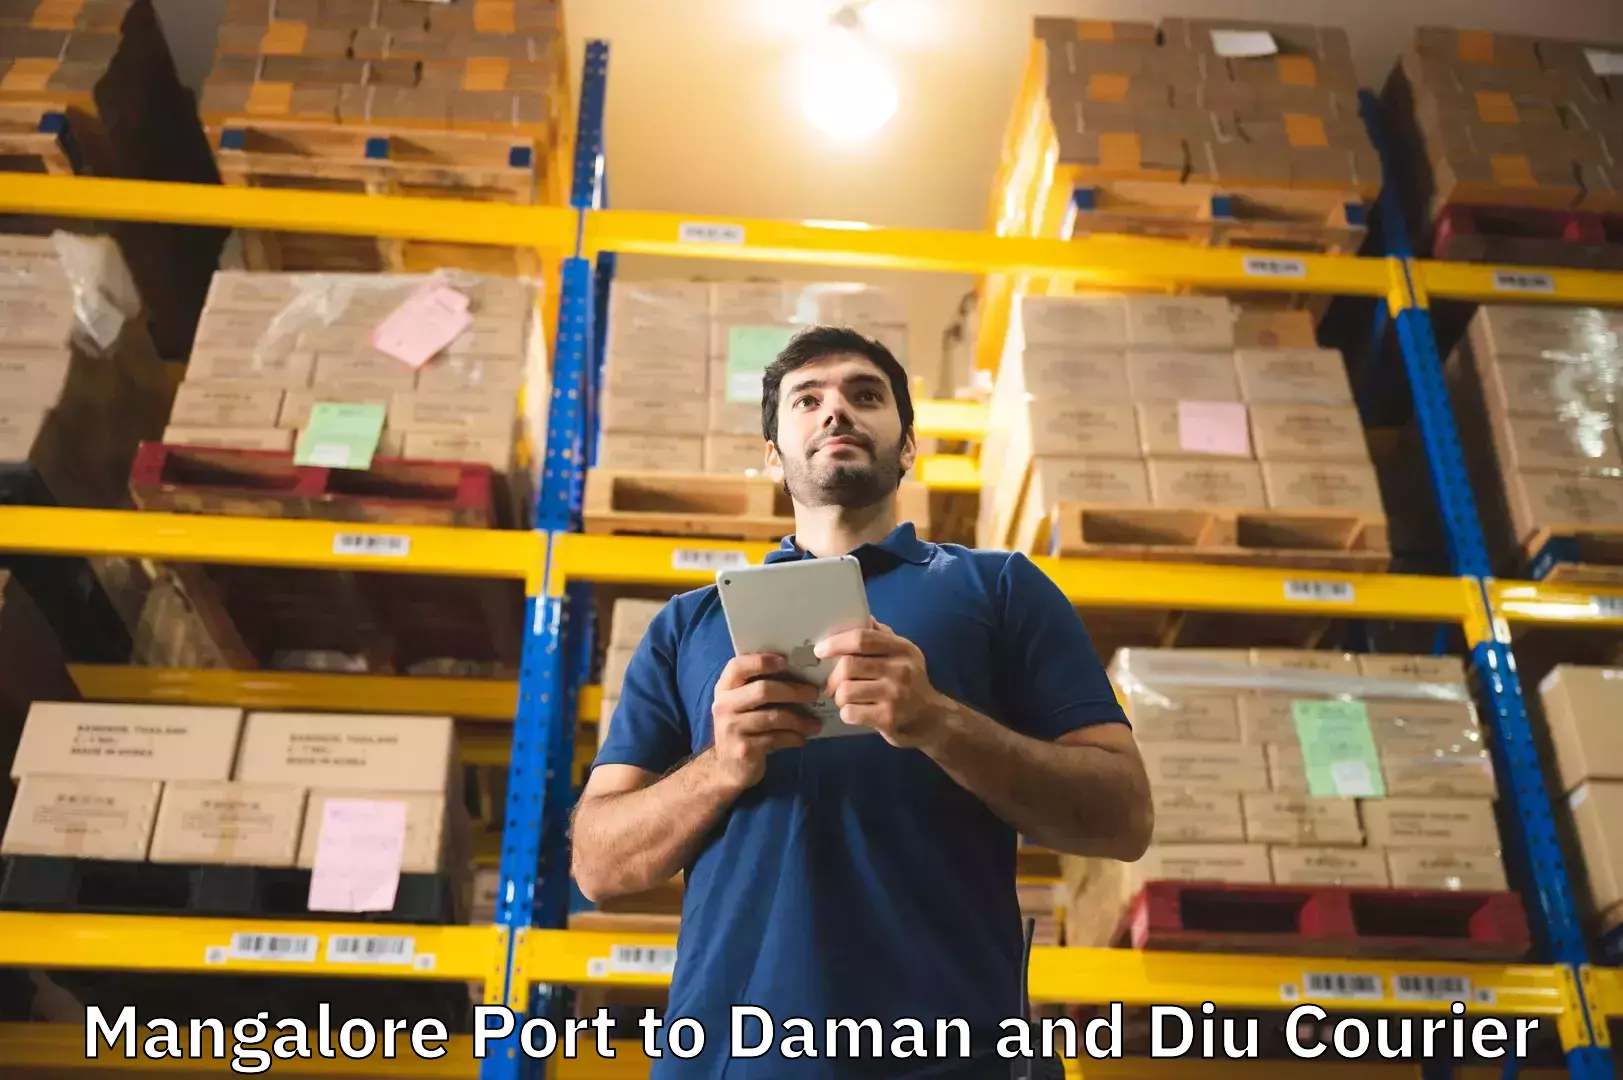 Luggage delivery operations Mangalore Port to Daman and Diu